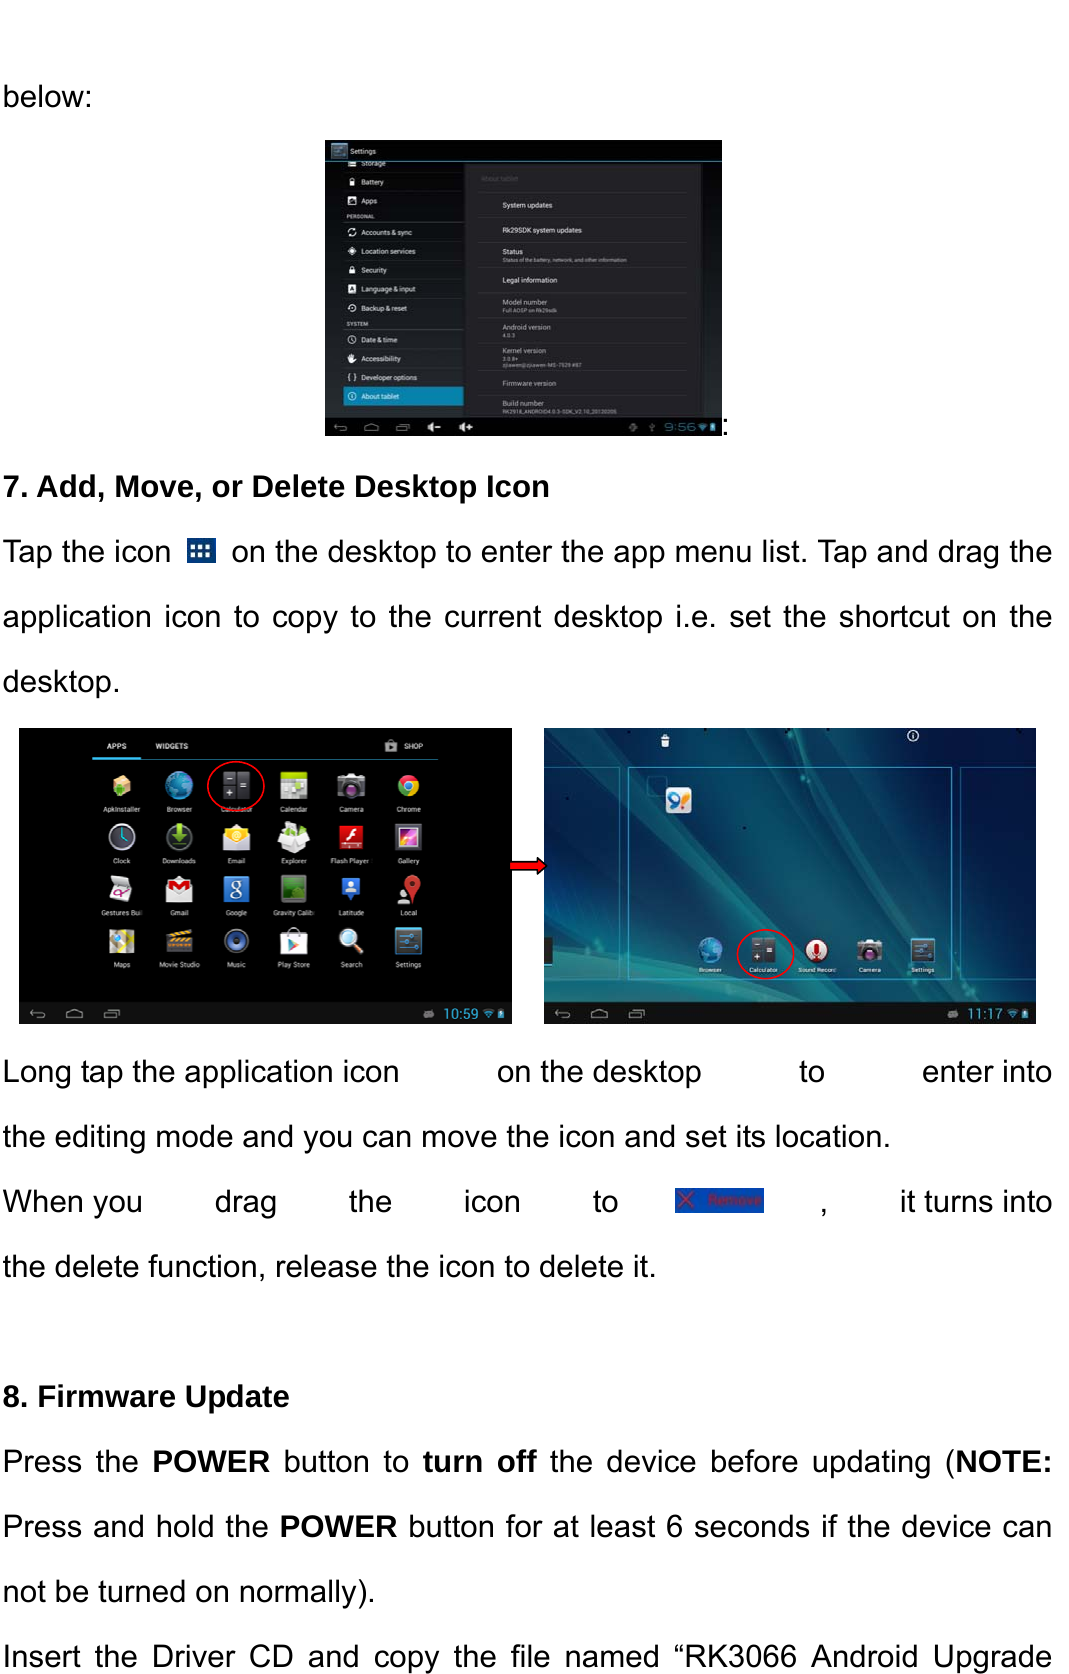    below:  : 7. Add, Move, or Delete Desktop Icon Tap the icon    on the desktop to enter the app menu list. Tap and drag the application icon to copy to the current desktop i.e. set the shortcut on the desktop.              Long tap the application icon  on the desktop  to  enter into the editing mode and you can move the icon and set its location.   When you drag the icon to , it turns into the delete function, release the icon to delete it.  8. Firmware Update Press the POWER button to turn off the device before updating (NOTE: Press and hold the POWER button for at least 6 seconds if the device can not be turned on normally).   Insert the Driver CD and copy the file named “RK3066 Android Upgrade 